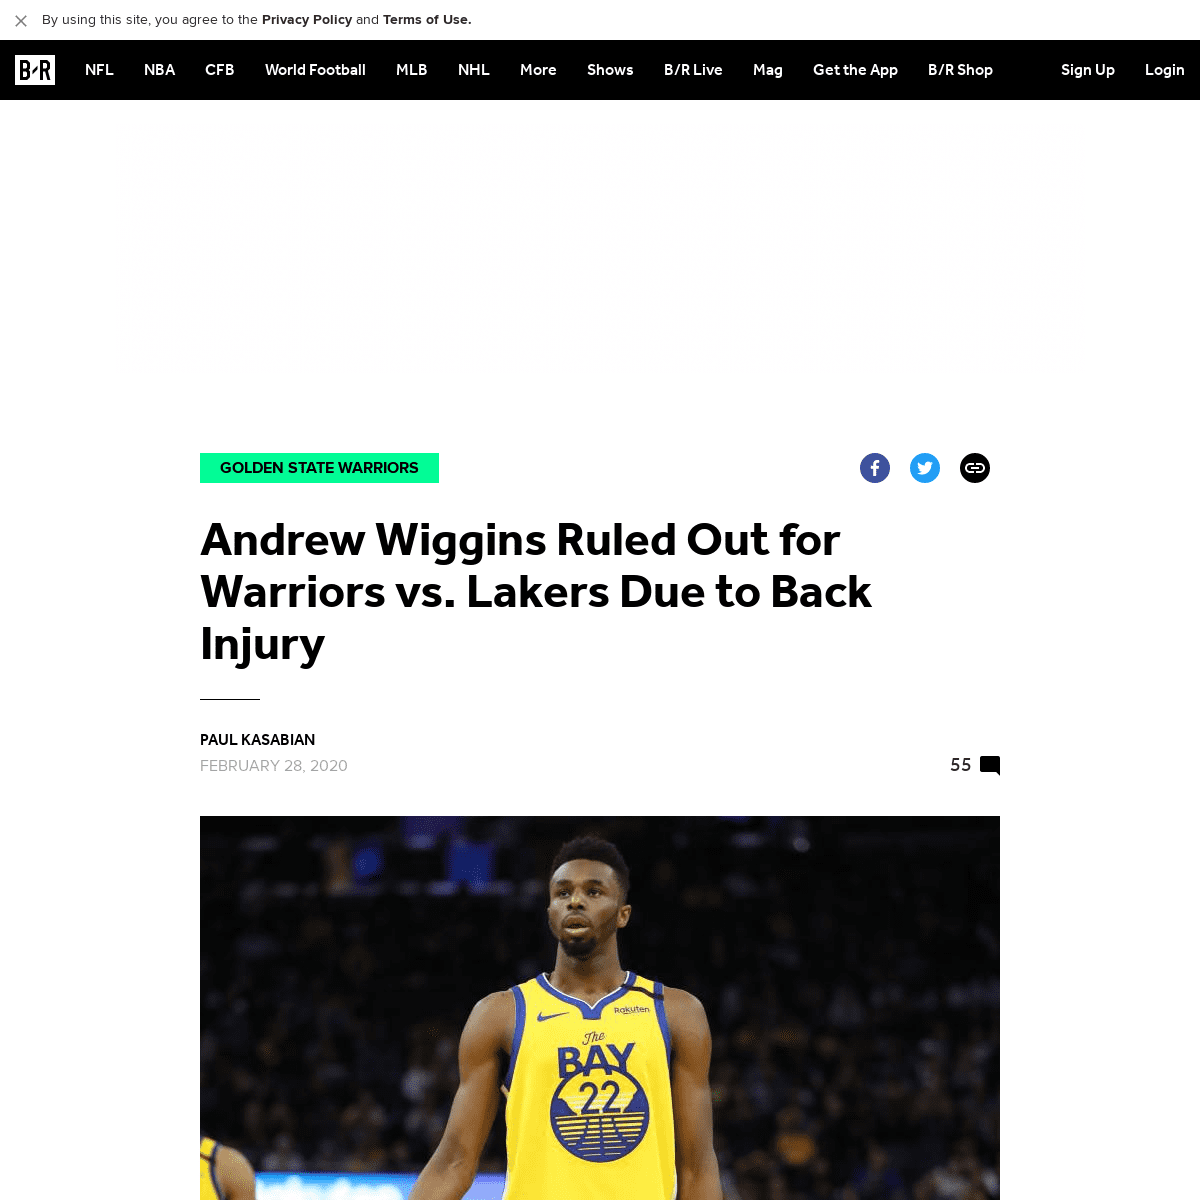 A complete backup of bleacherreport.com/articles/2847824-andrew-wiggins-ruled-out-for-warriors-vs-lakers-due-to-back-injury